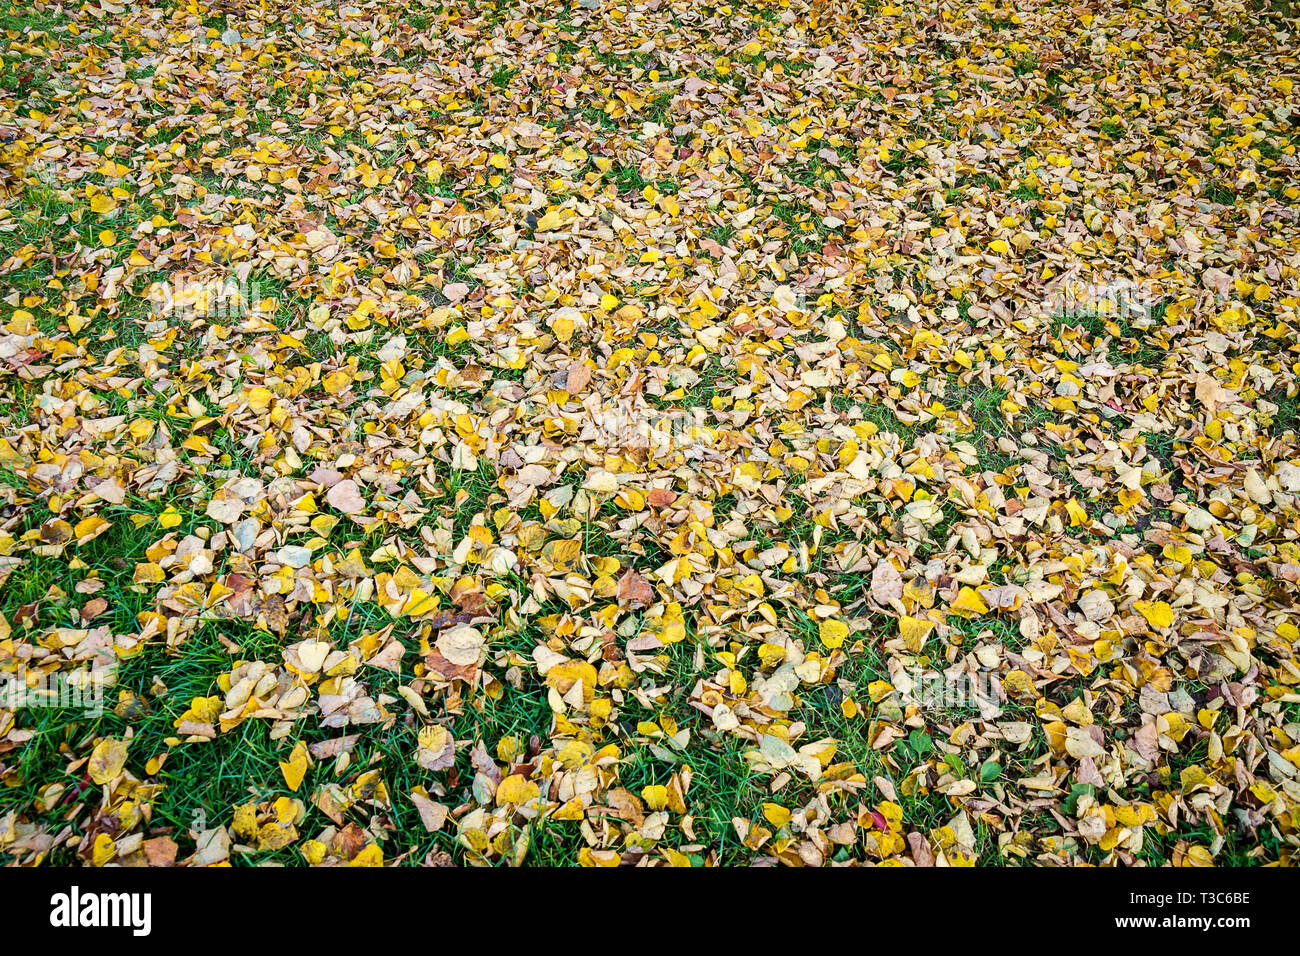 Dry linden leaves on green grass. Autumn background. Autumn leaves on the ground. Stock Photo